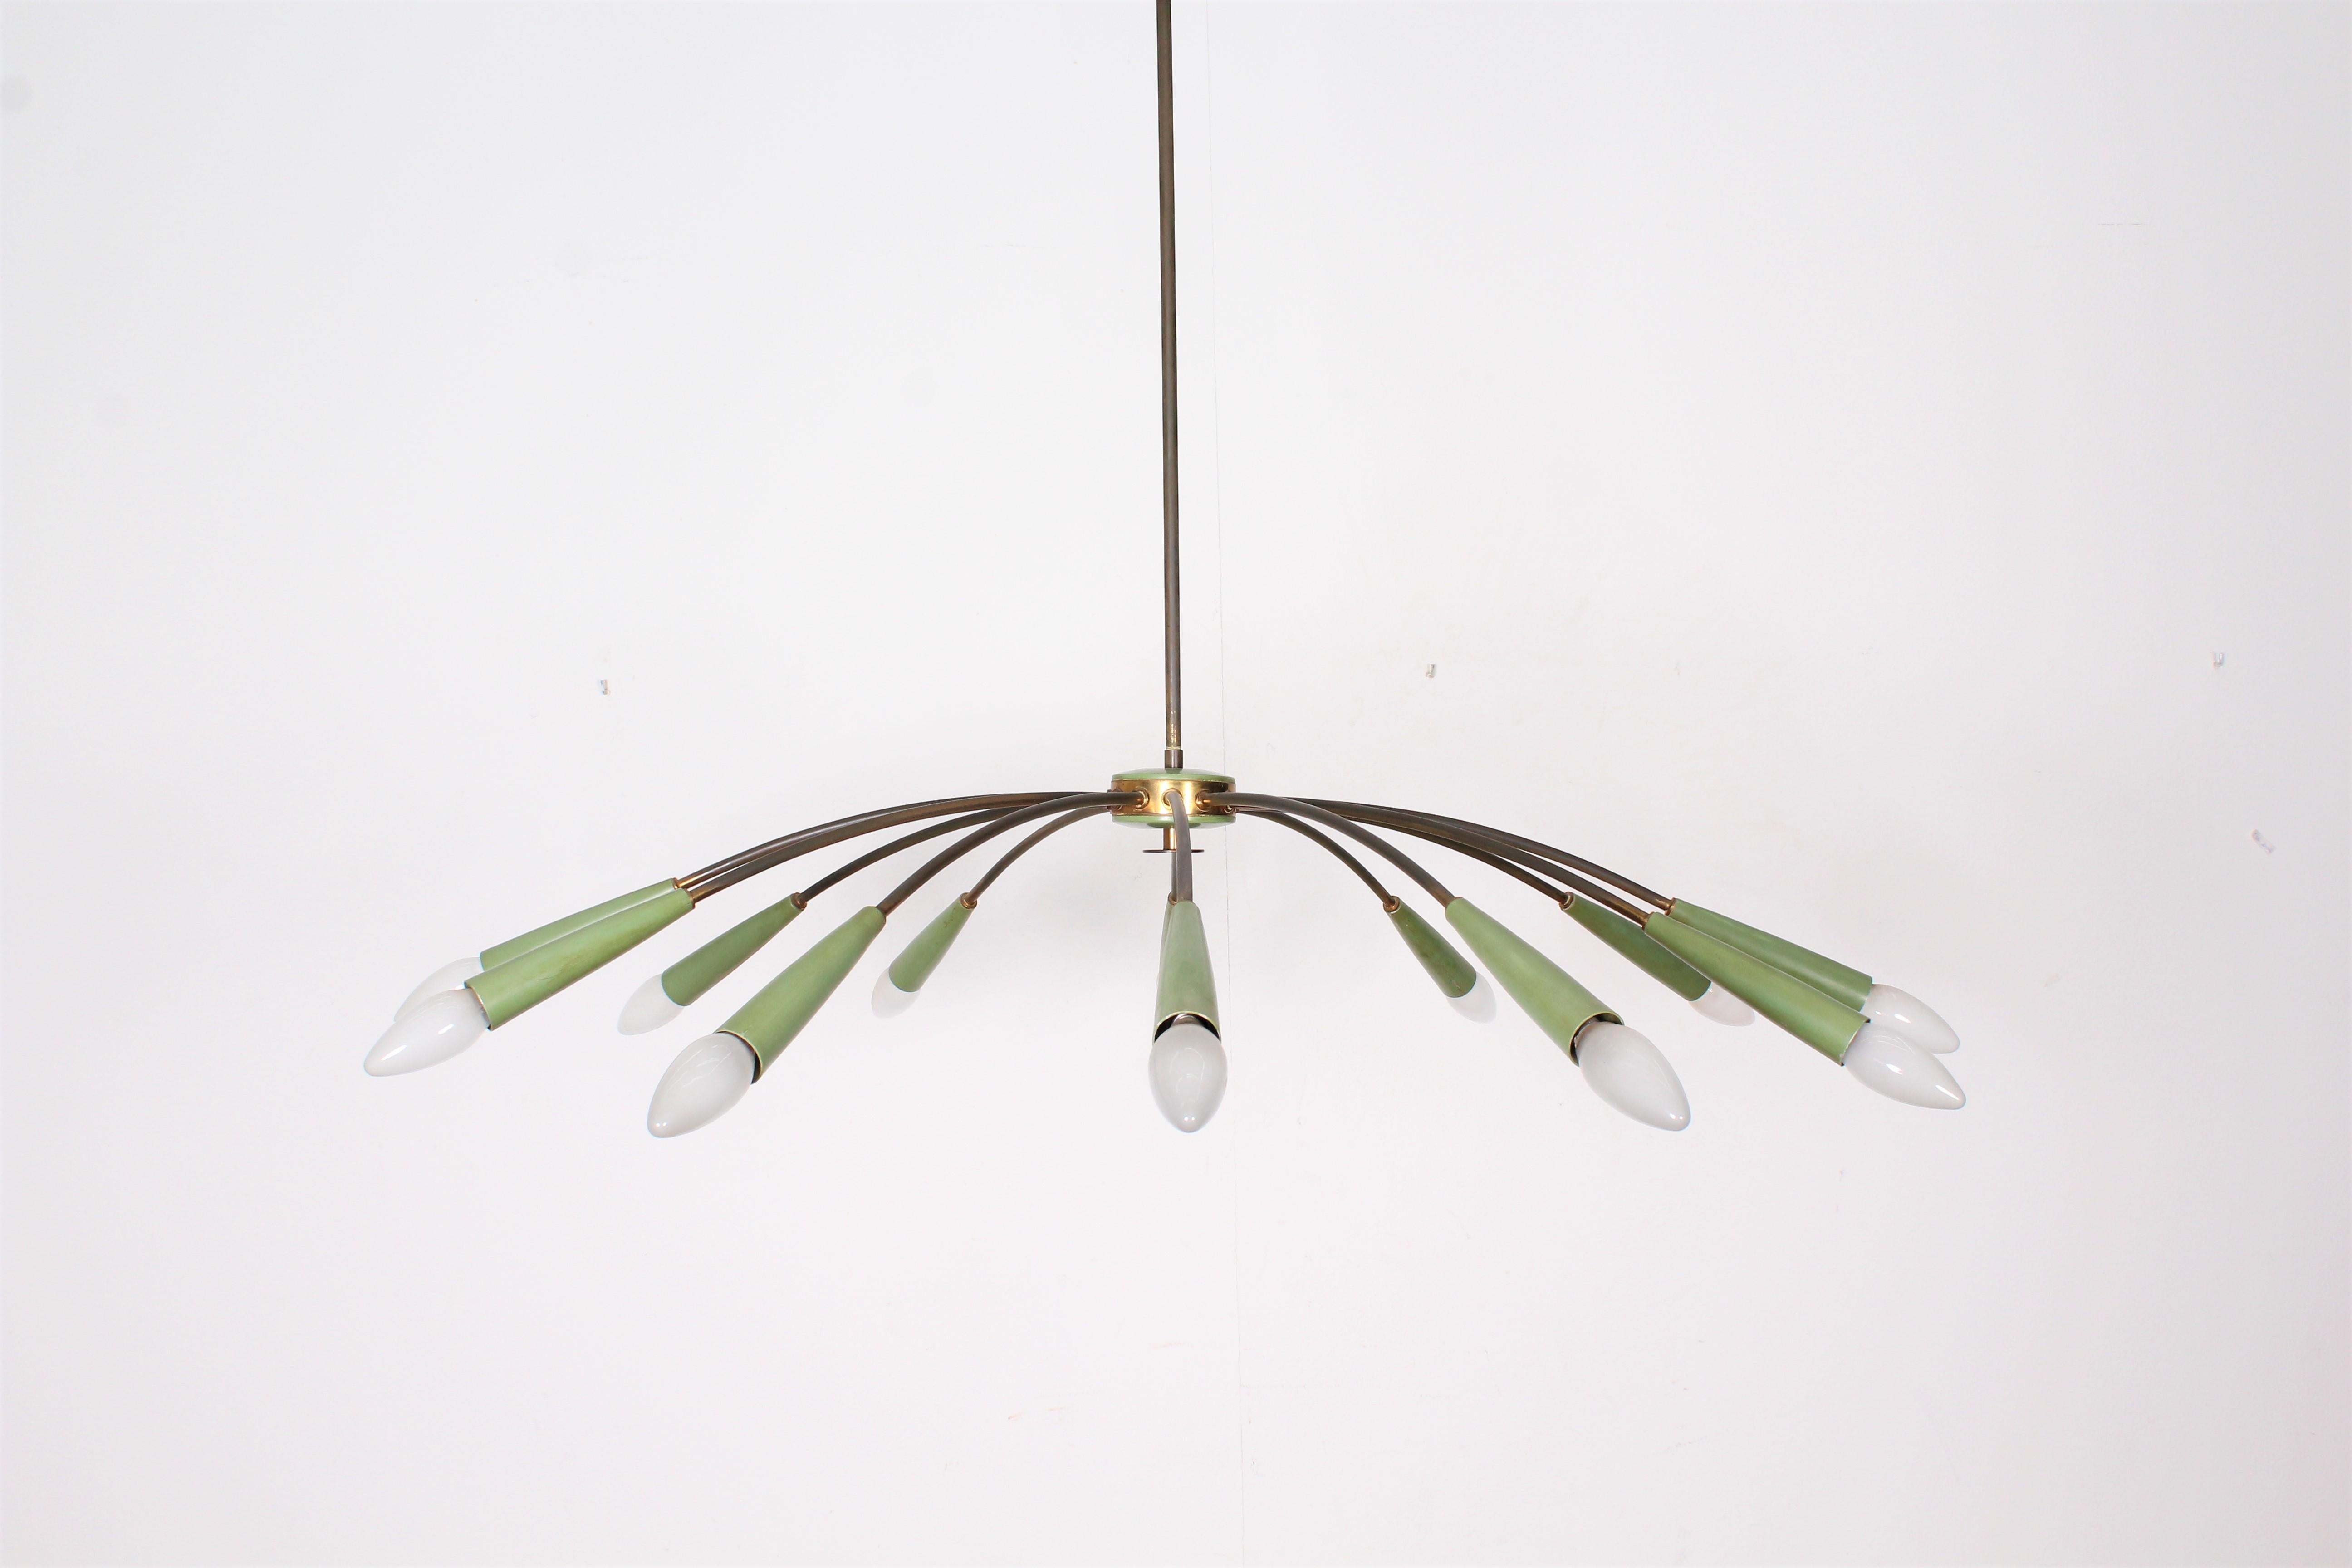  A sculptural 1960s brass Italian sputnik in green metal, designed by Oscar Torlasco for Lumi whit  twelve-light source.
It has 12 graceful arms each curving at theexternal.
Its 95cm diameter provides a broad sphere of light.  
 Wear consistent with